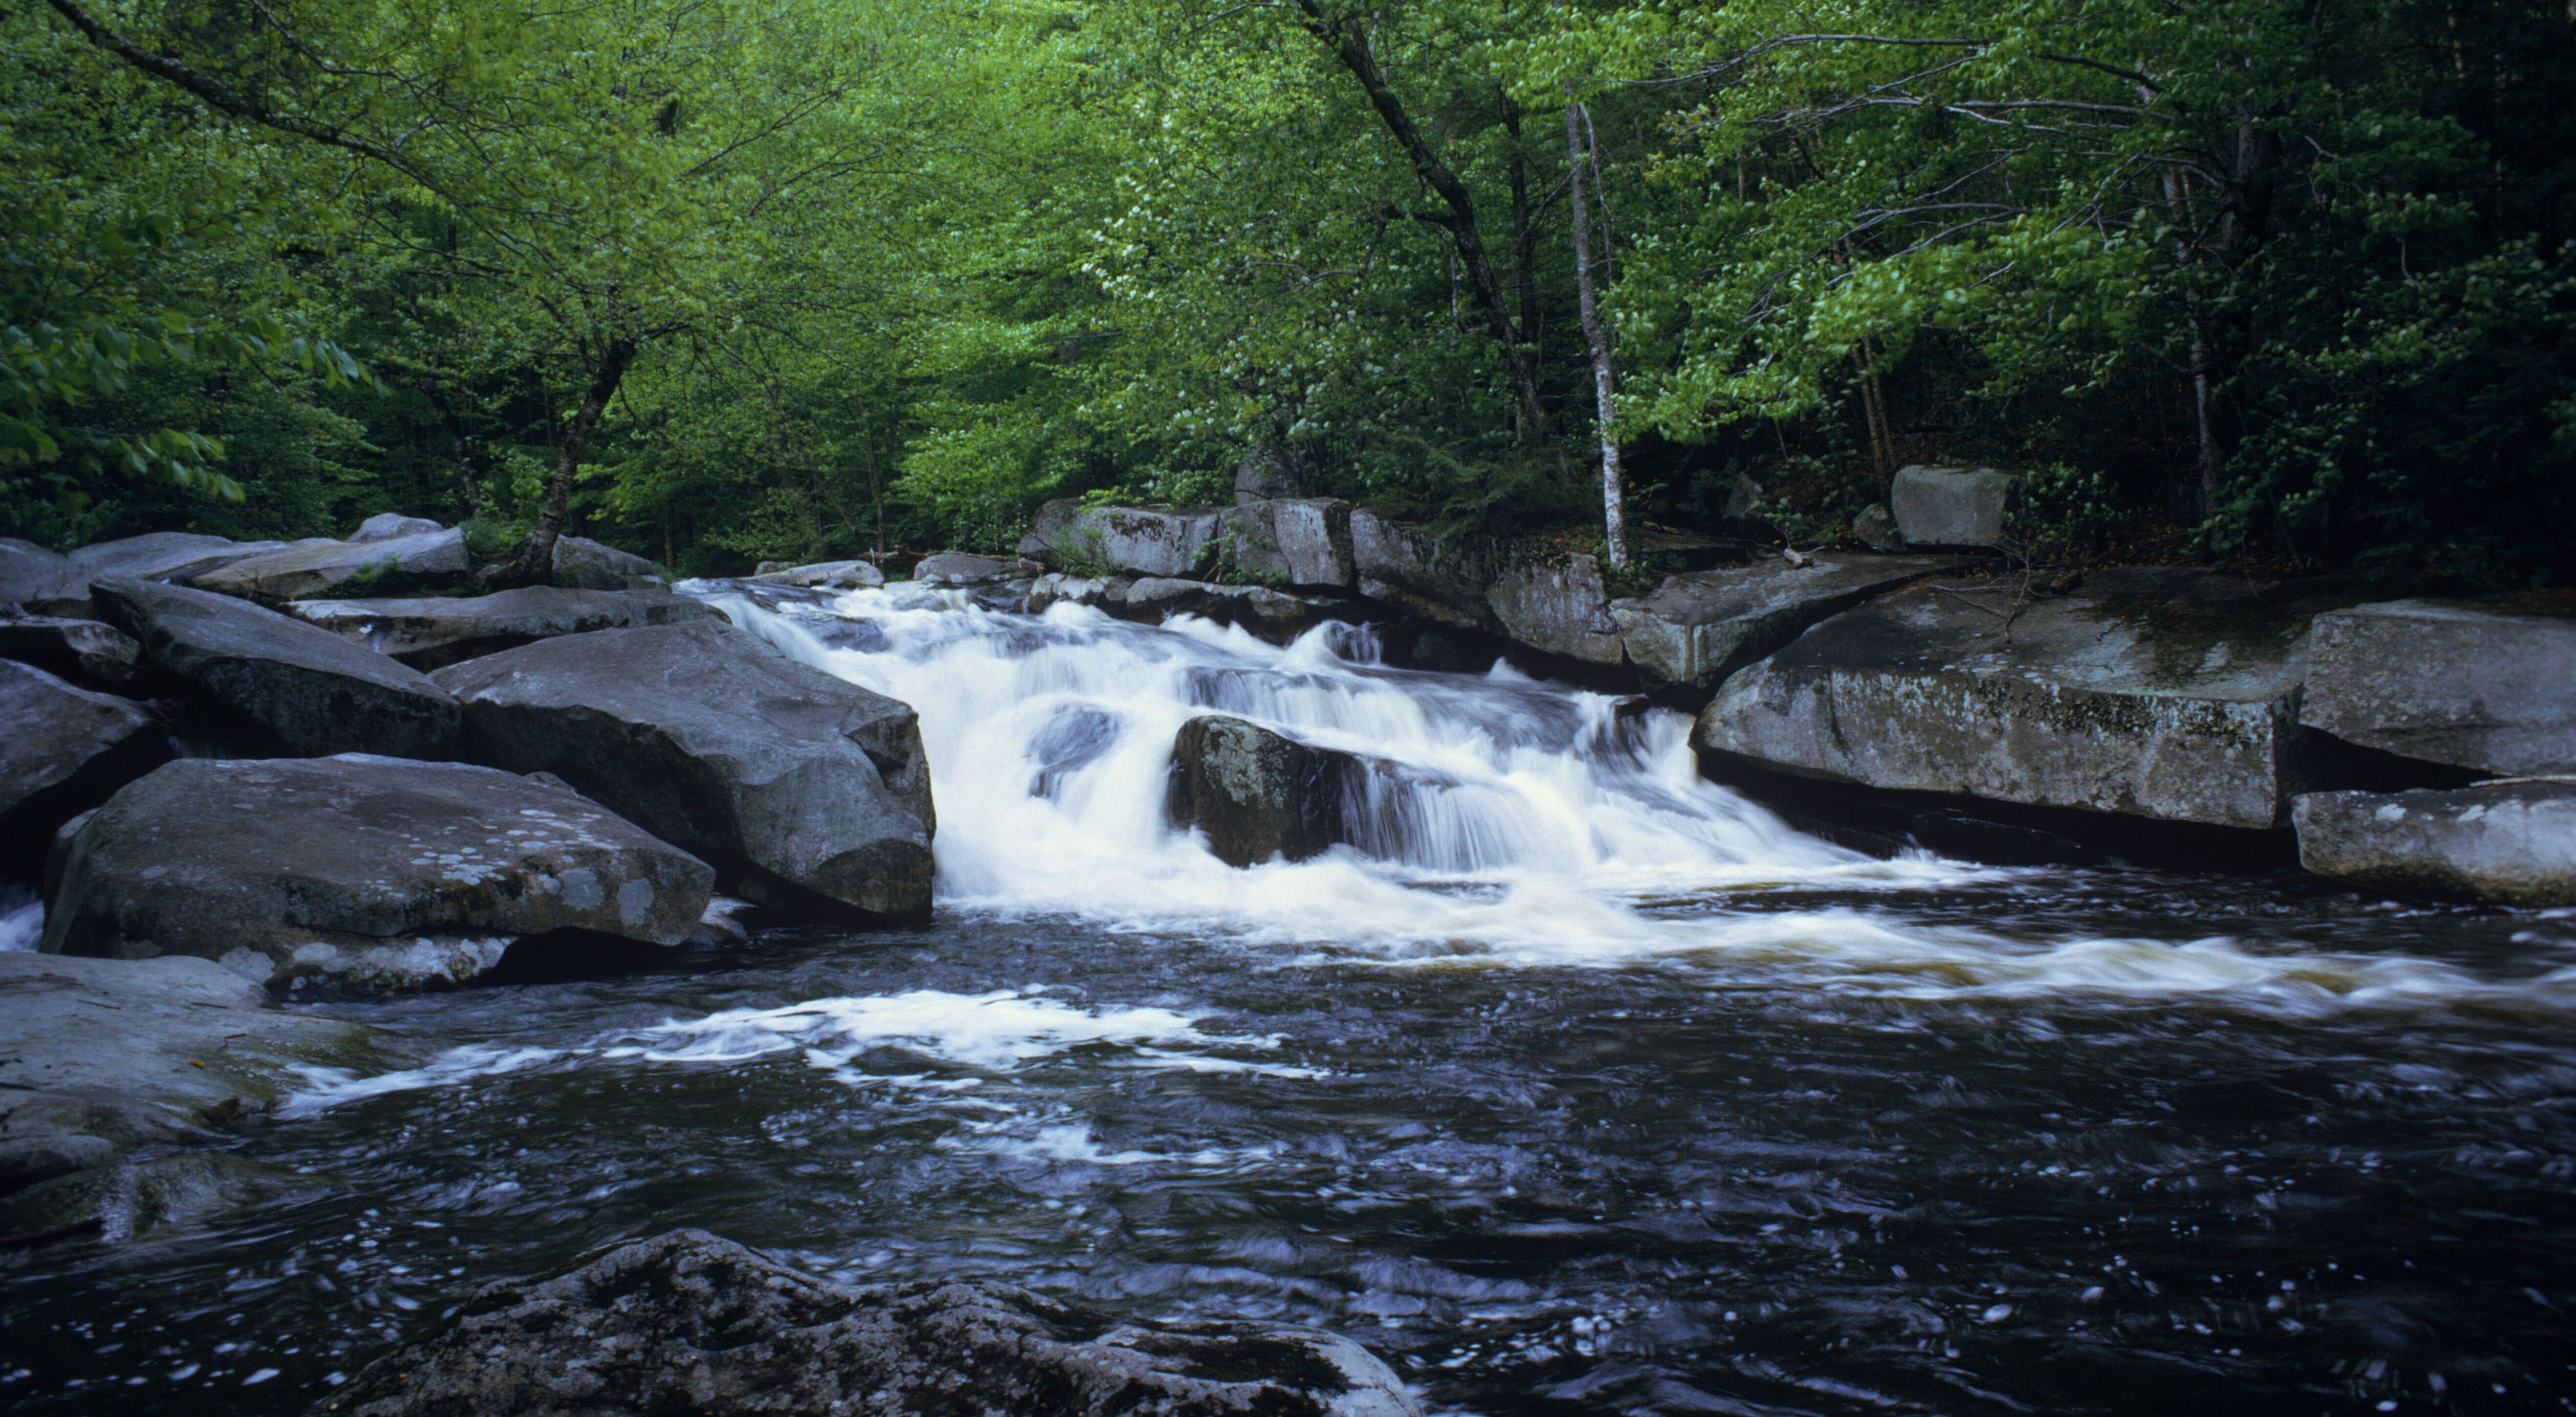 A small waterfall in the Dead Branch Brook surrounded by leafy green trees.